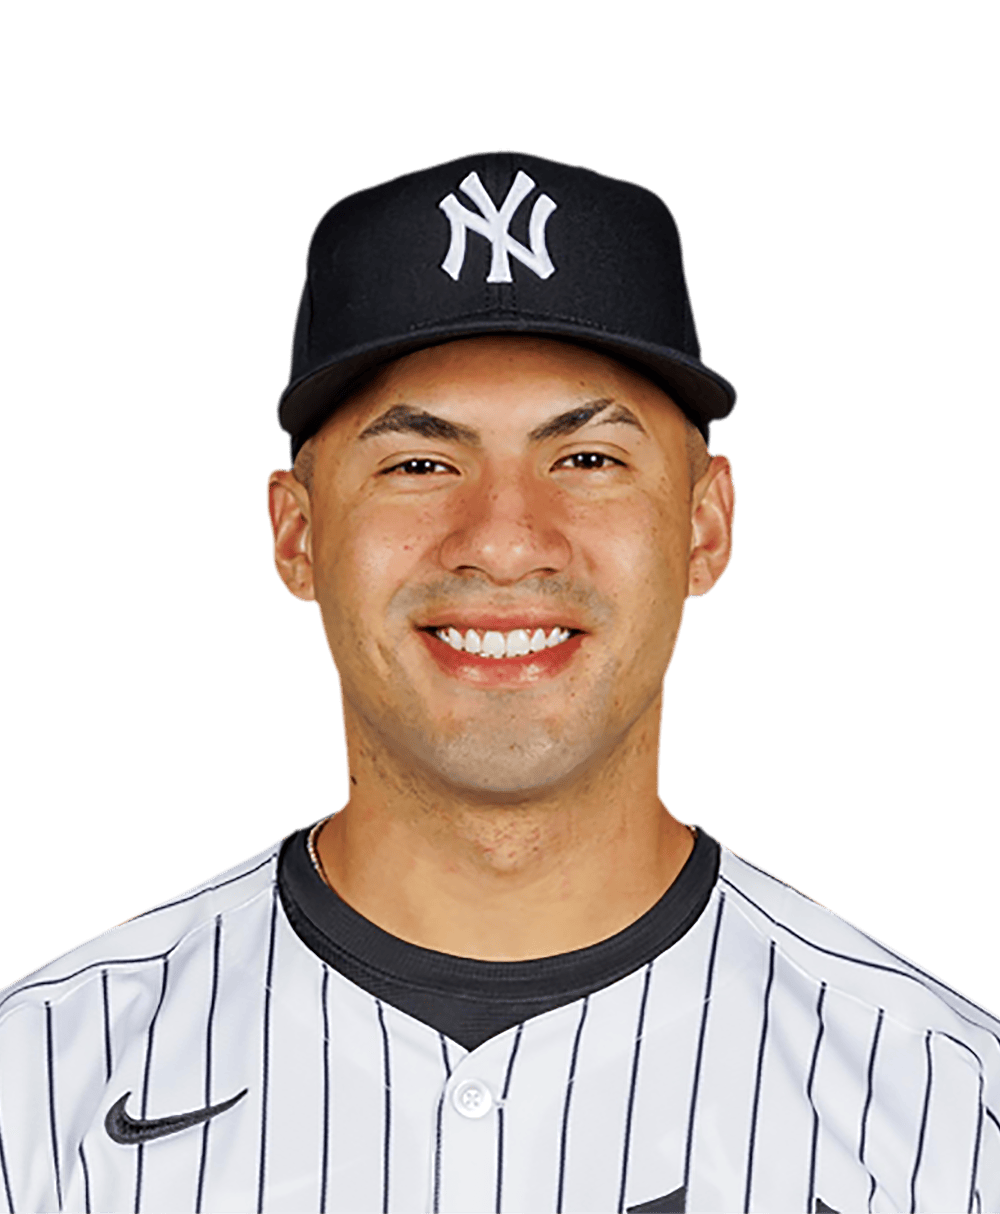 It's time for Yankees to trade Gleyber Torres